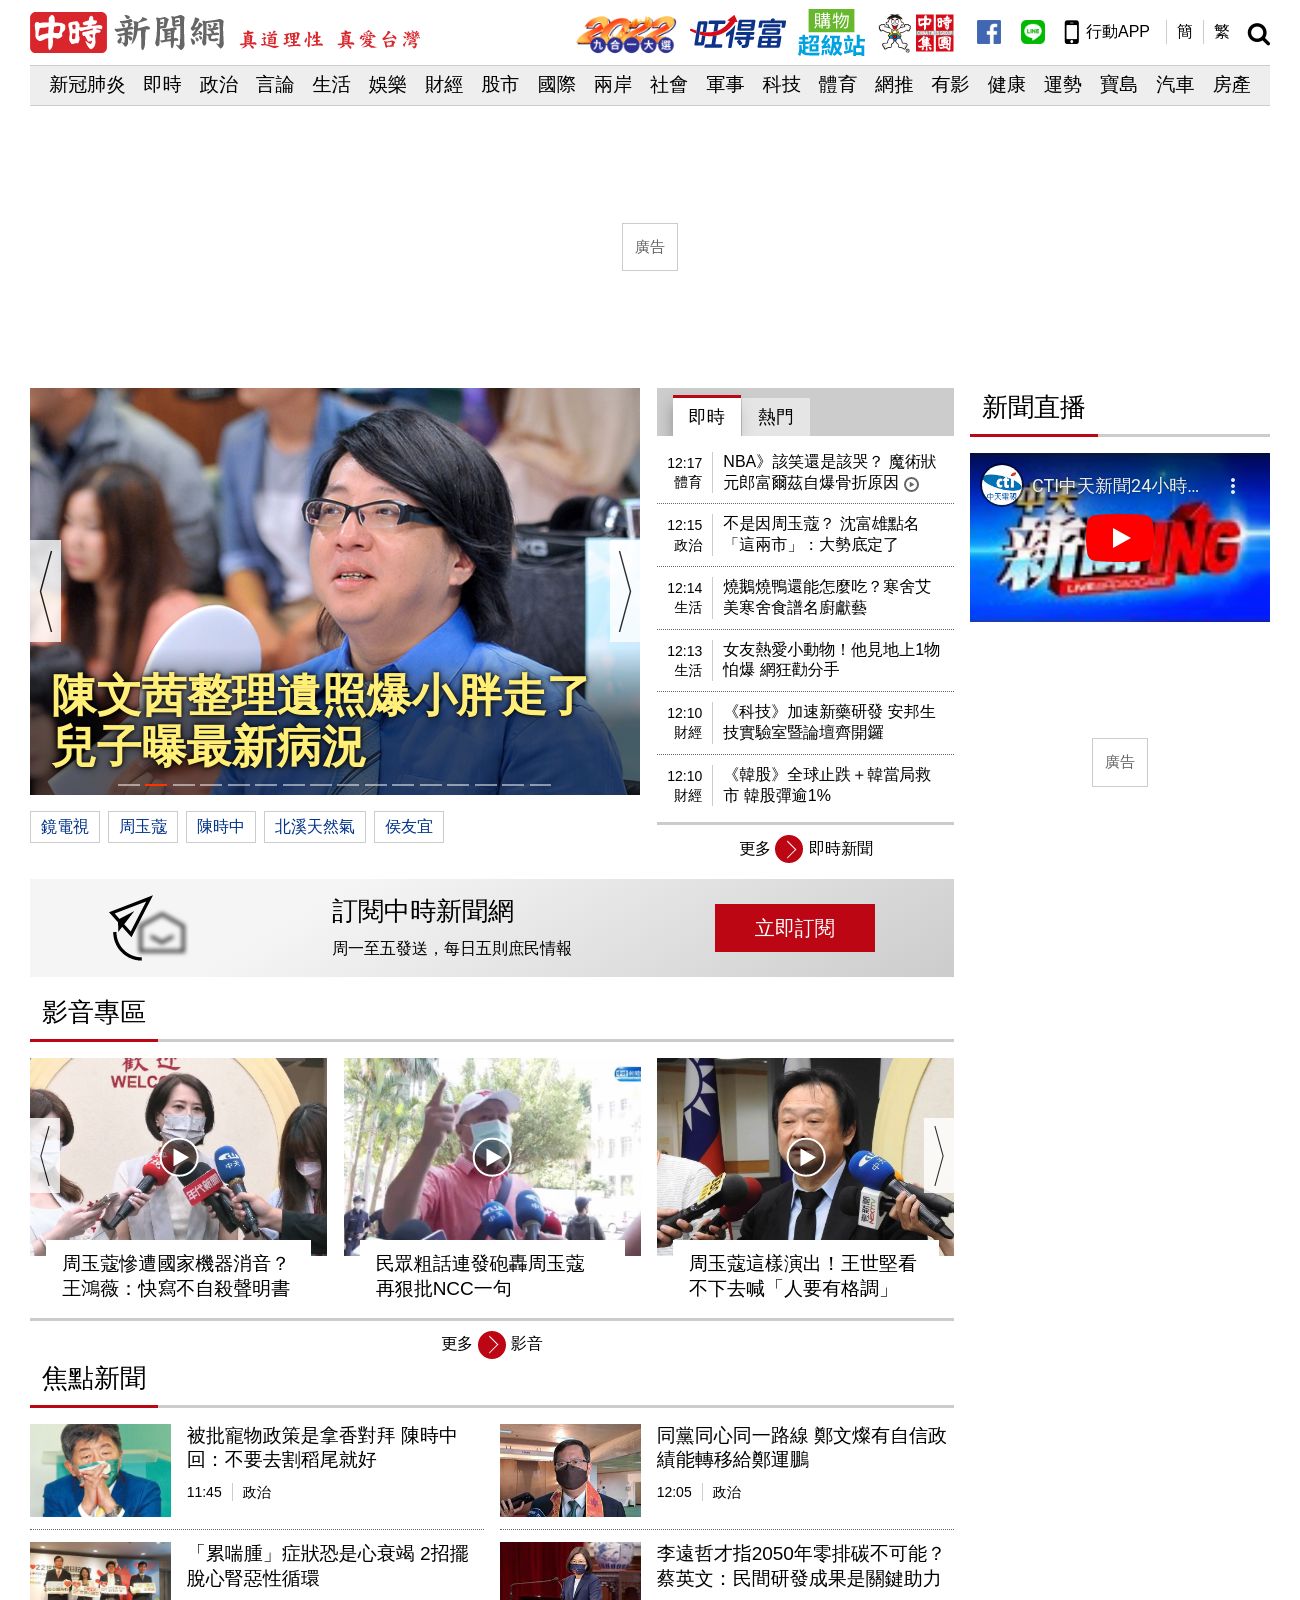 China Times at 2022-09-29 13:22:32+08:00 local time